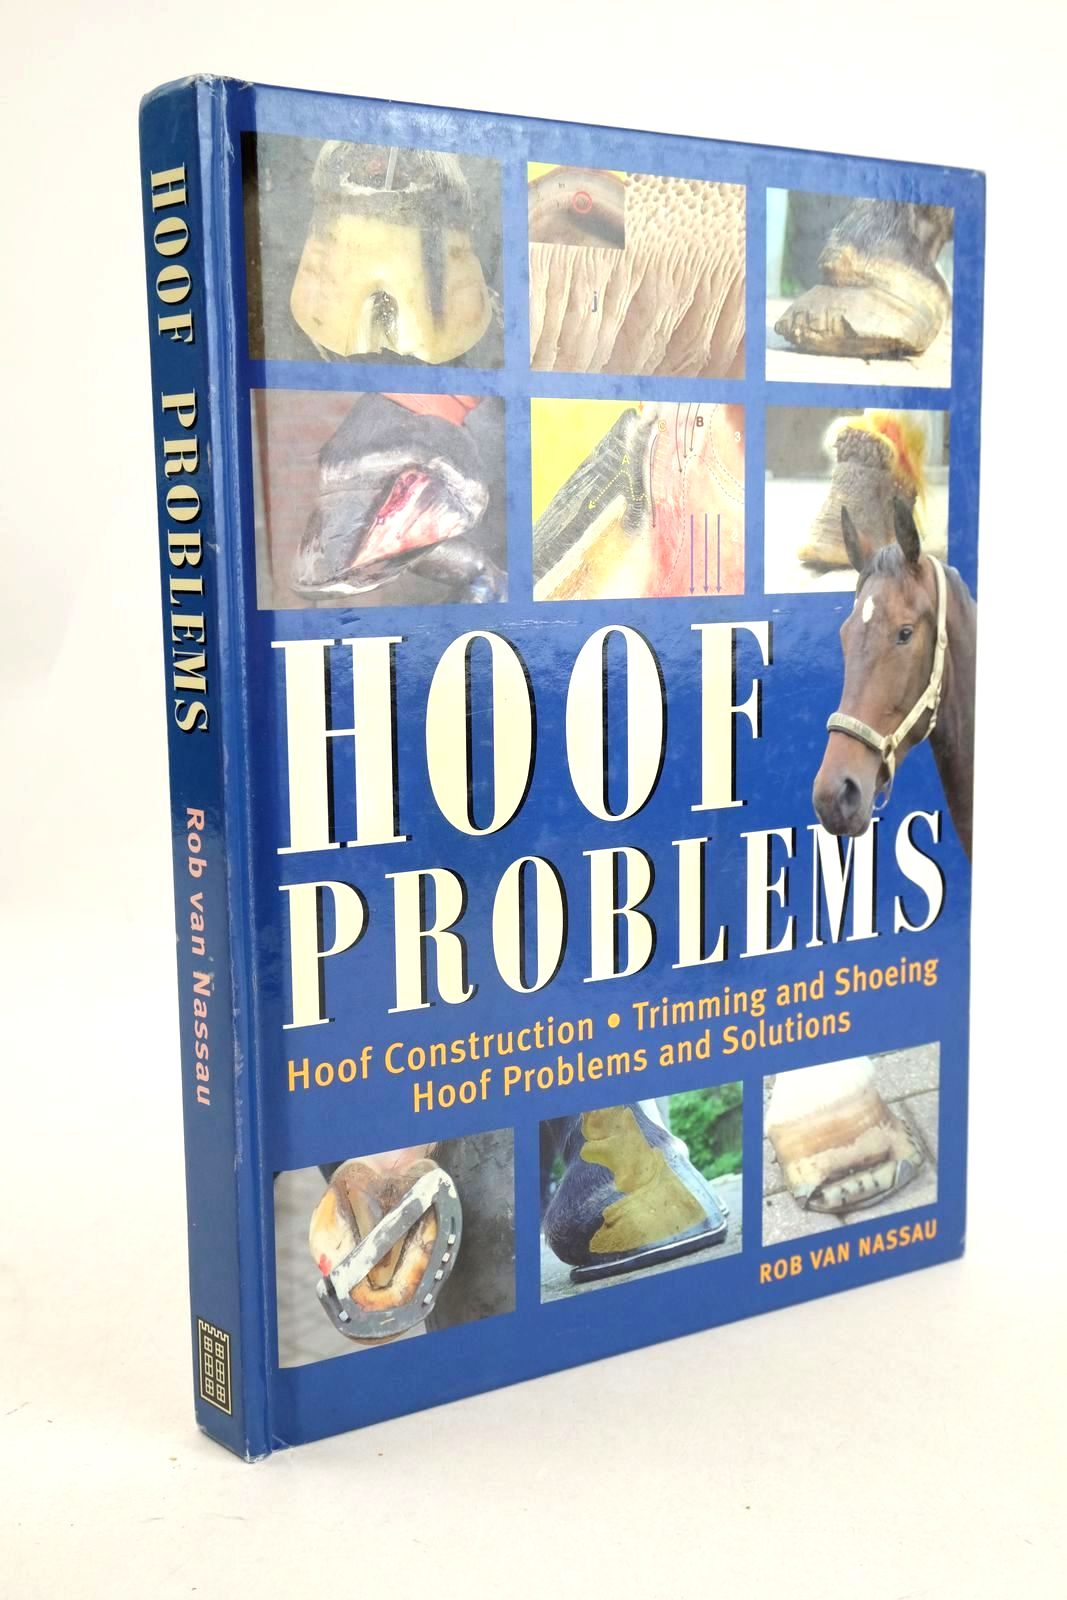 Photo of HOOF PROBLEMS written by Van Nassau, Rob published by Kenilworth Press (STOCK CODE: 1327078)  for sale by Stella & Rose's Books